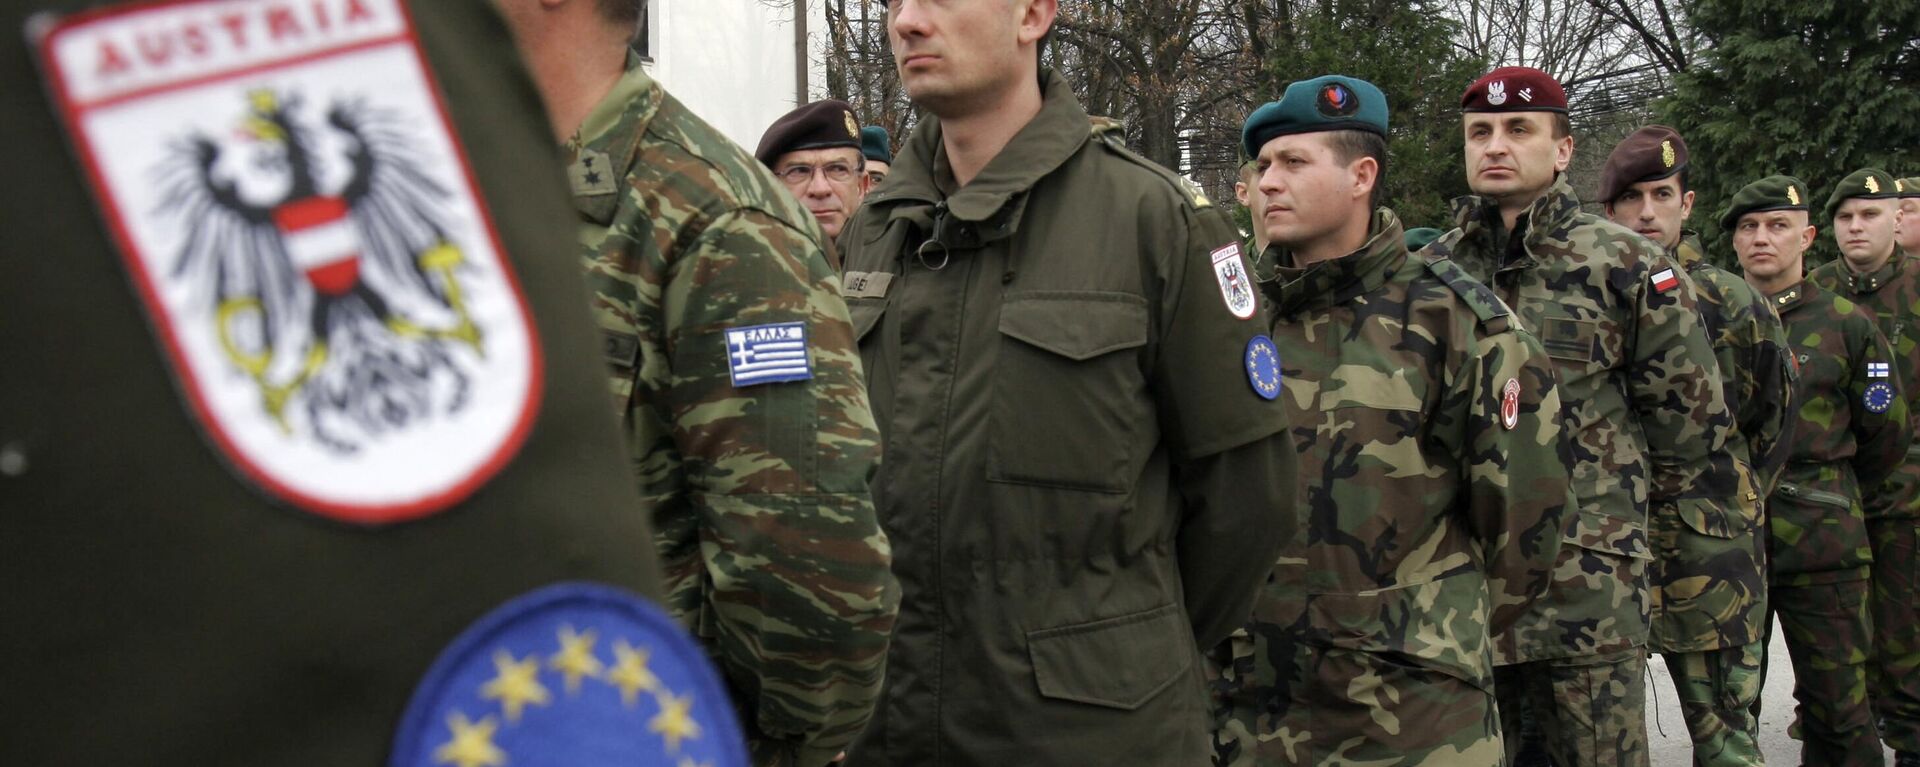 Soldiers from European countries, including Austria, Greece, Turkiye, Poland, Portugal and Finland, stand in a honour guard during the transfer of authority ceremony to mark the official Austrian takeover of command of the European Union peace force (EUFOR) in the northern part of Bosnia, at Eagle Base near Tuzla, 75 kms north of Sarajevo, Wednesday, Nov. 30, 2005 - Sputnik International, 1920, 09.03.2024